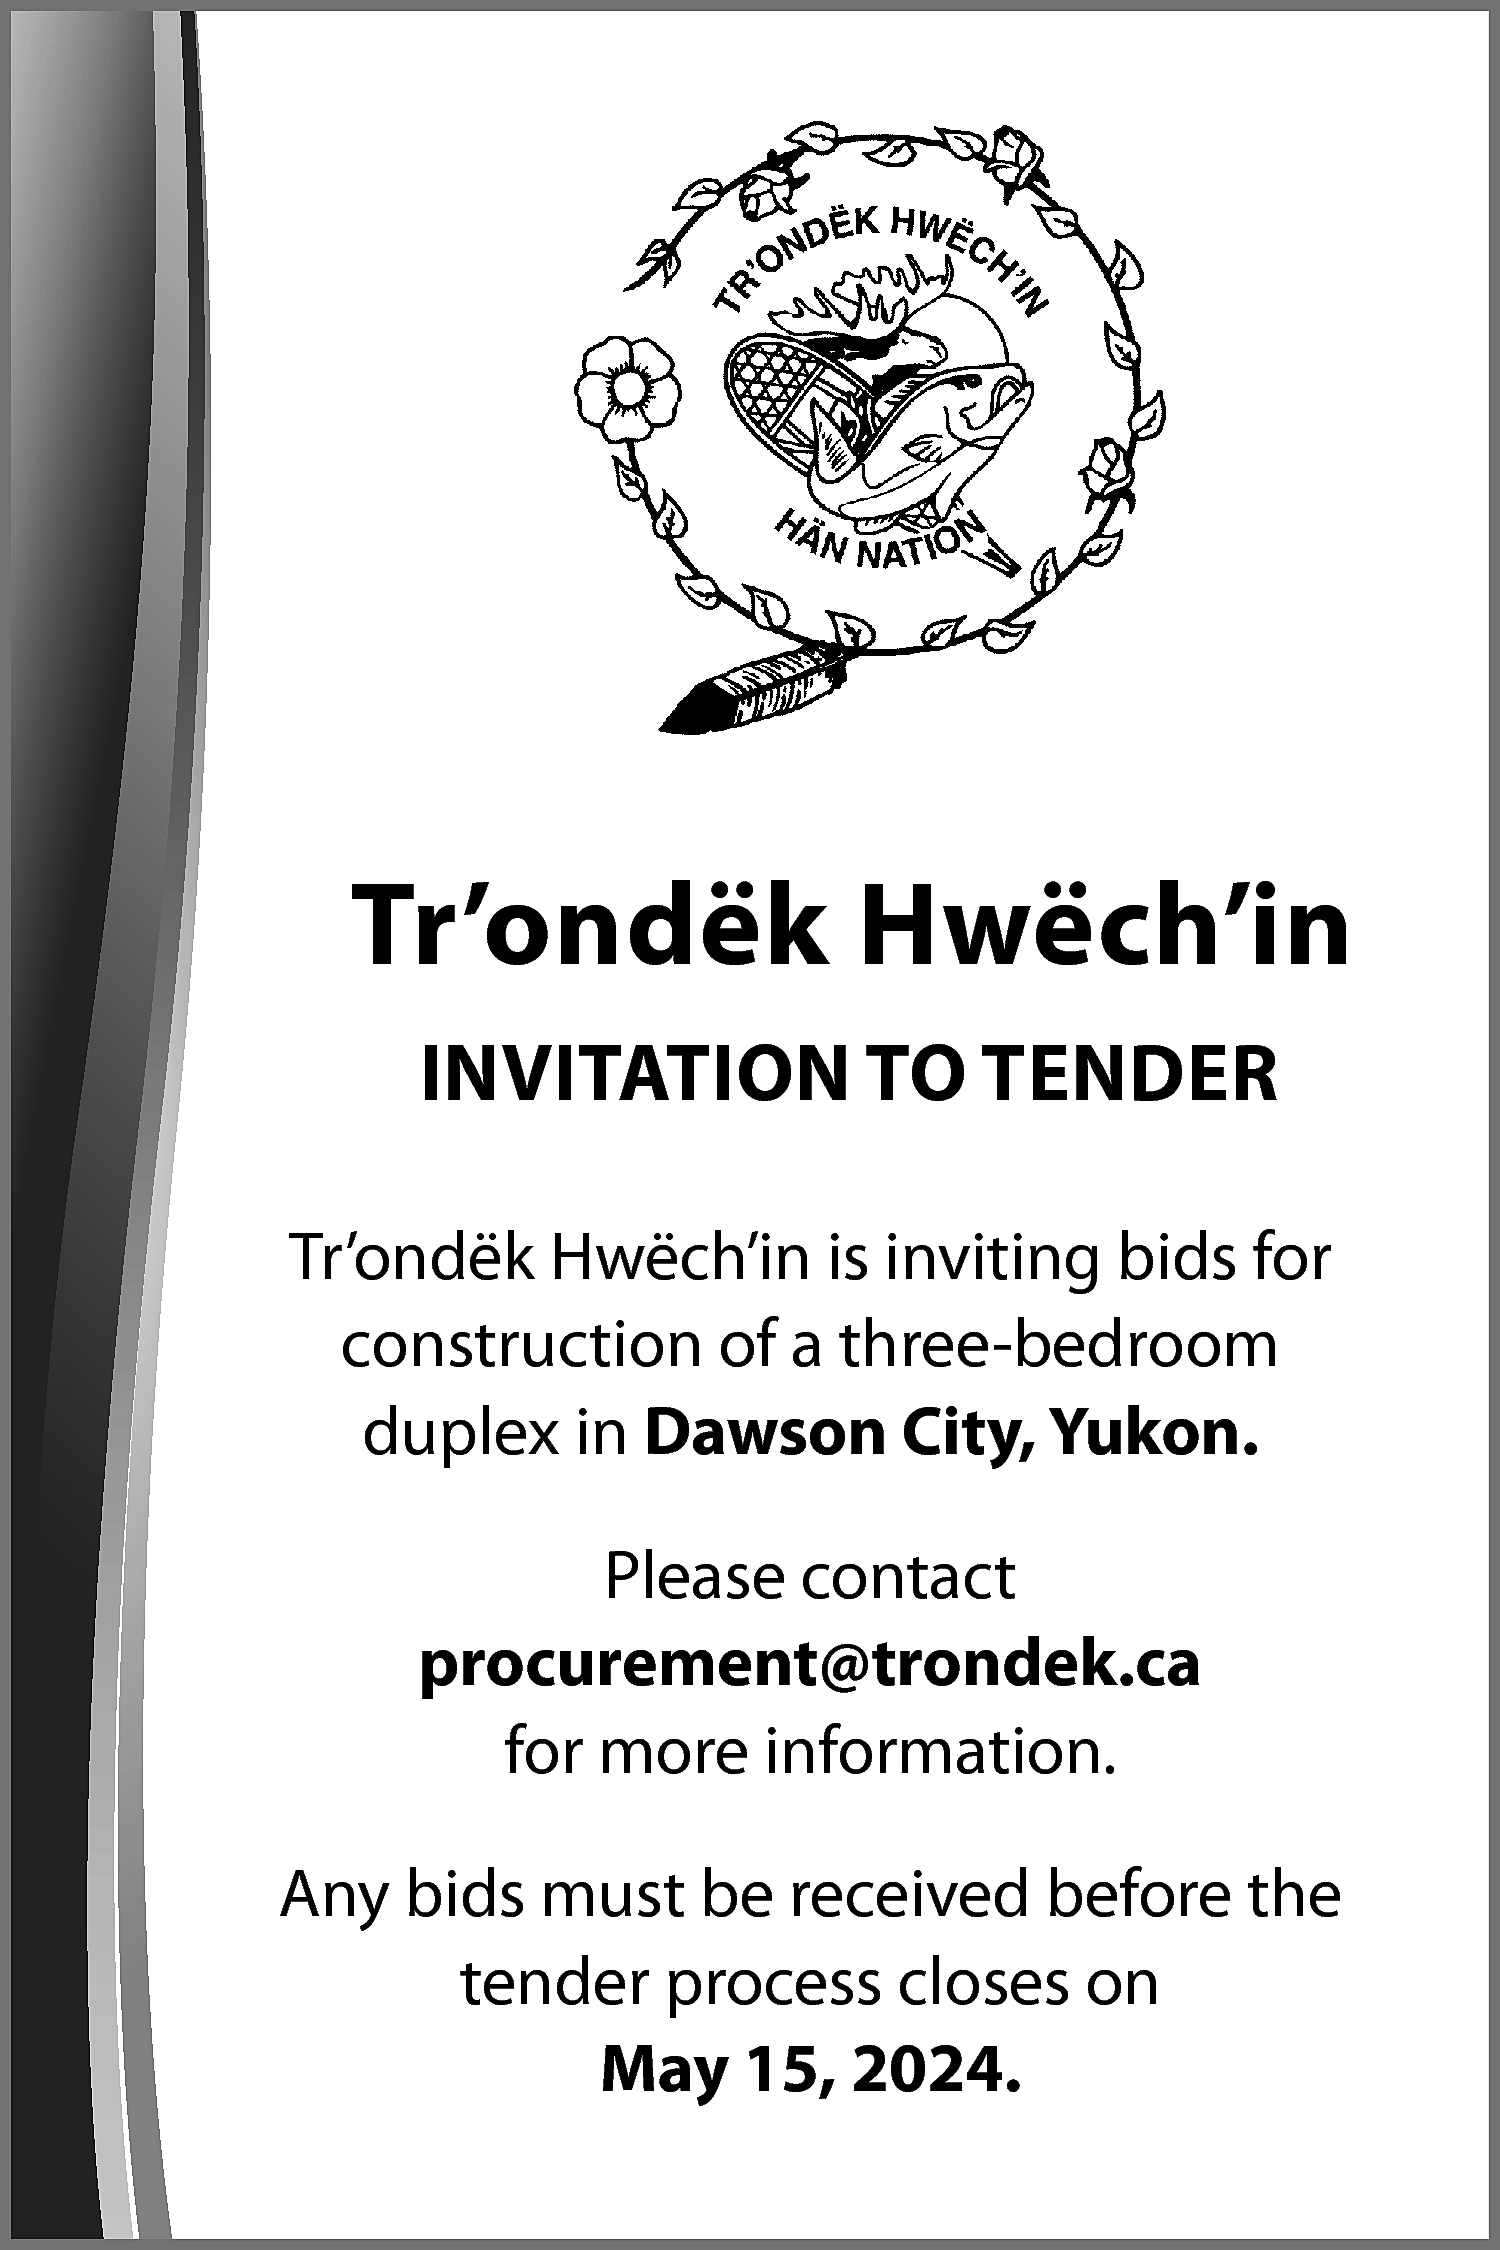 Tr’ondëk Hwëch’in <br>INVITATION TO TENDER  Tr’ondëk Hwëch’in  INVITATION TO TENDER  Tr’ondëk Hwëch’in is inviting bids for  construction of a three-bedroom  duplex in Dawson City, Yukon.  Please contact  procurement@trondek.ca  for more information.  Any bids must be received before the  tender process closes on  May 15, 2024.    